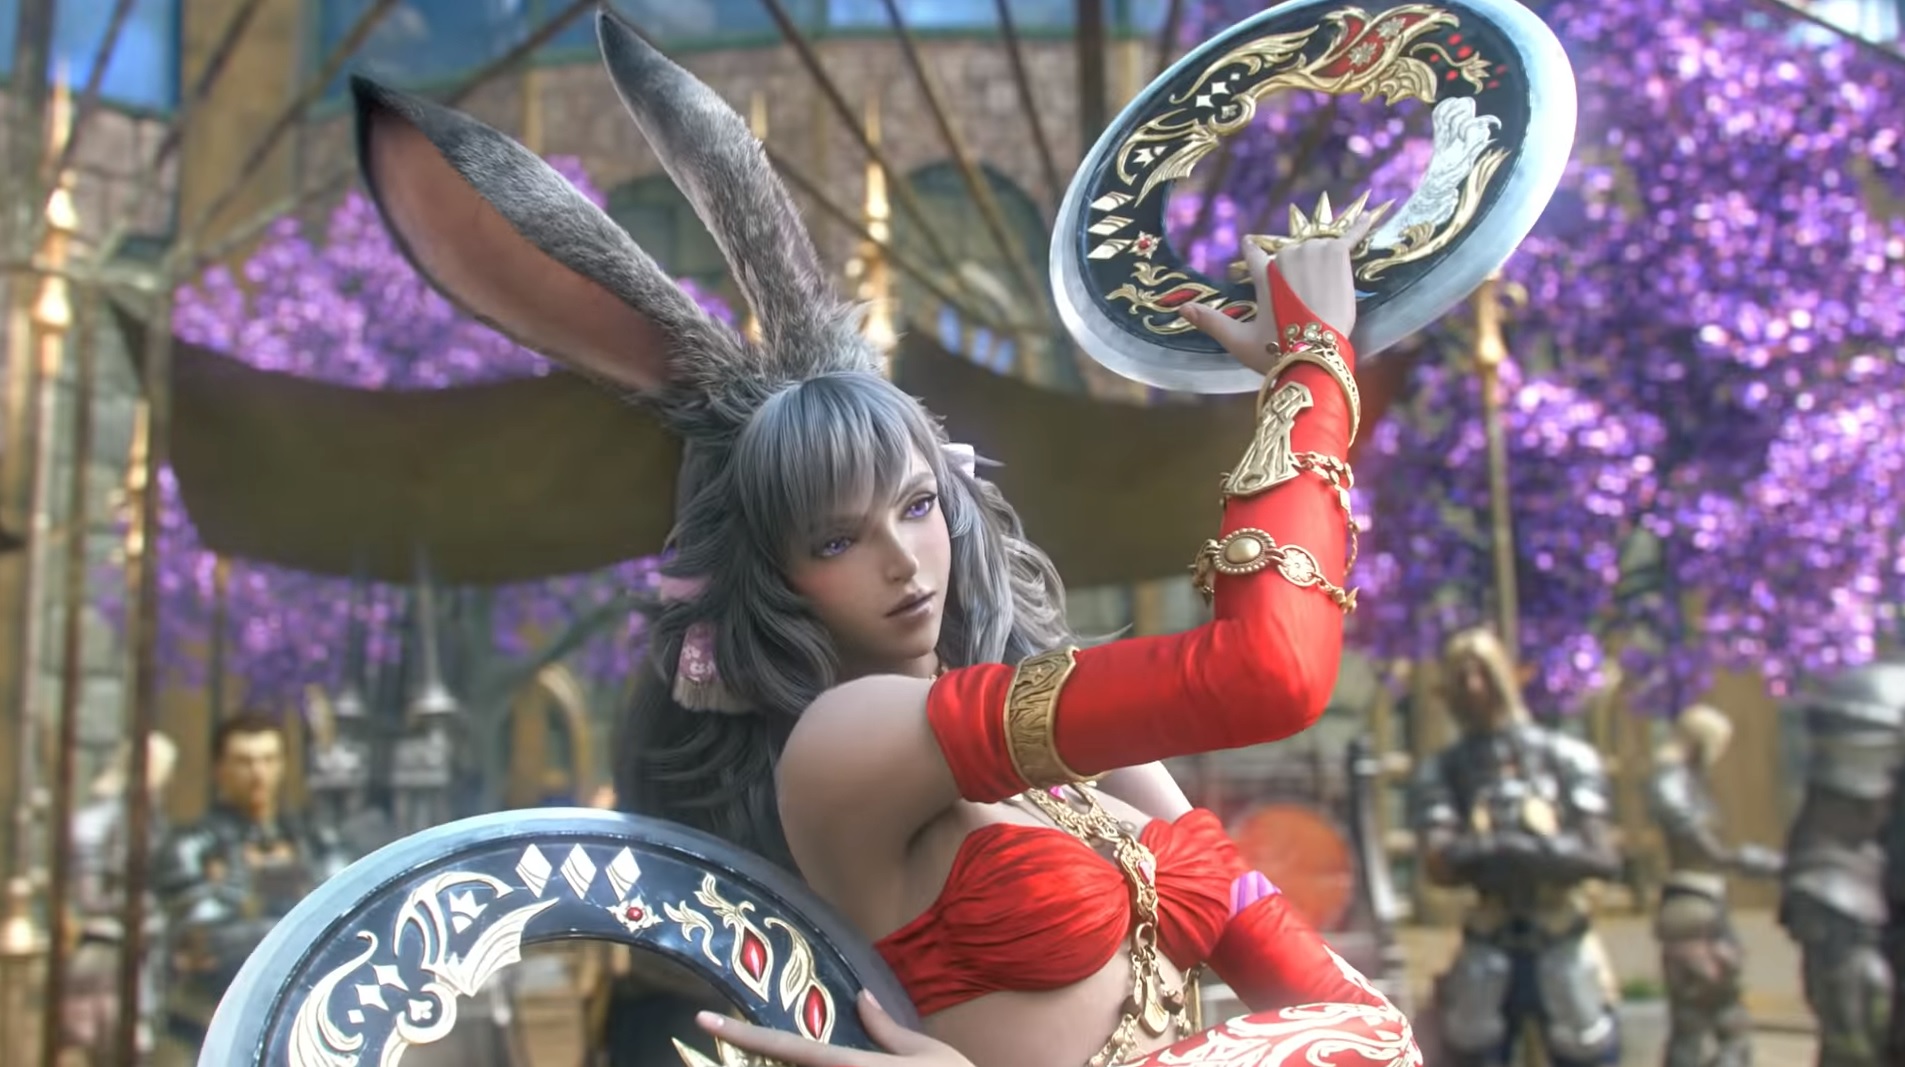 Best MMOs: Final Fantasy 14 - A Viera character in a red costume